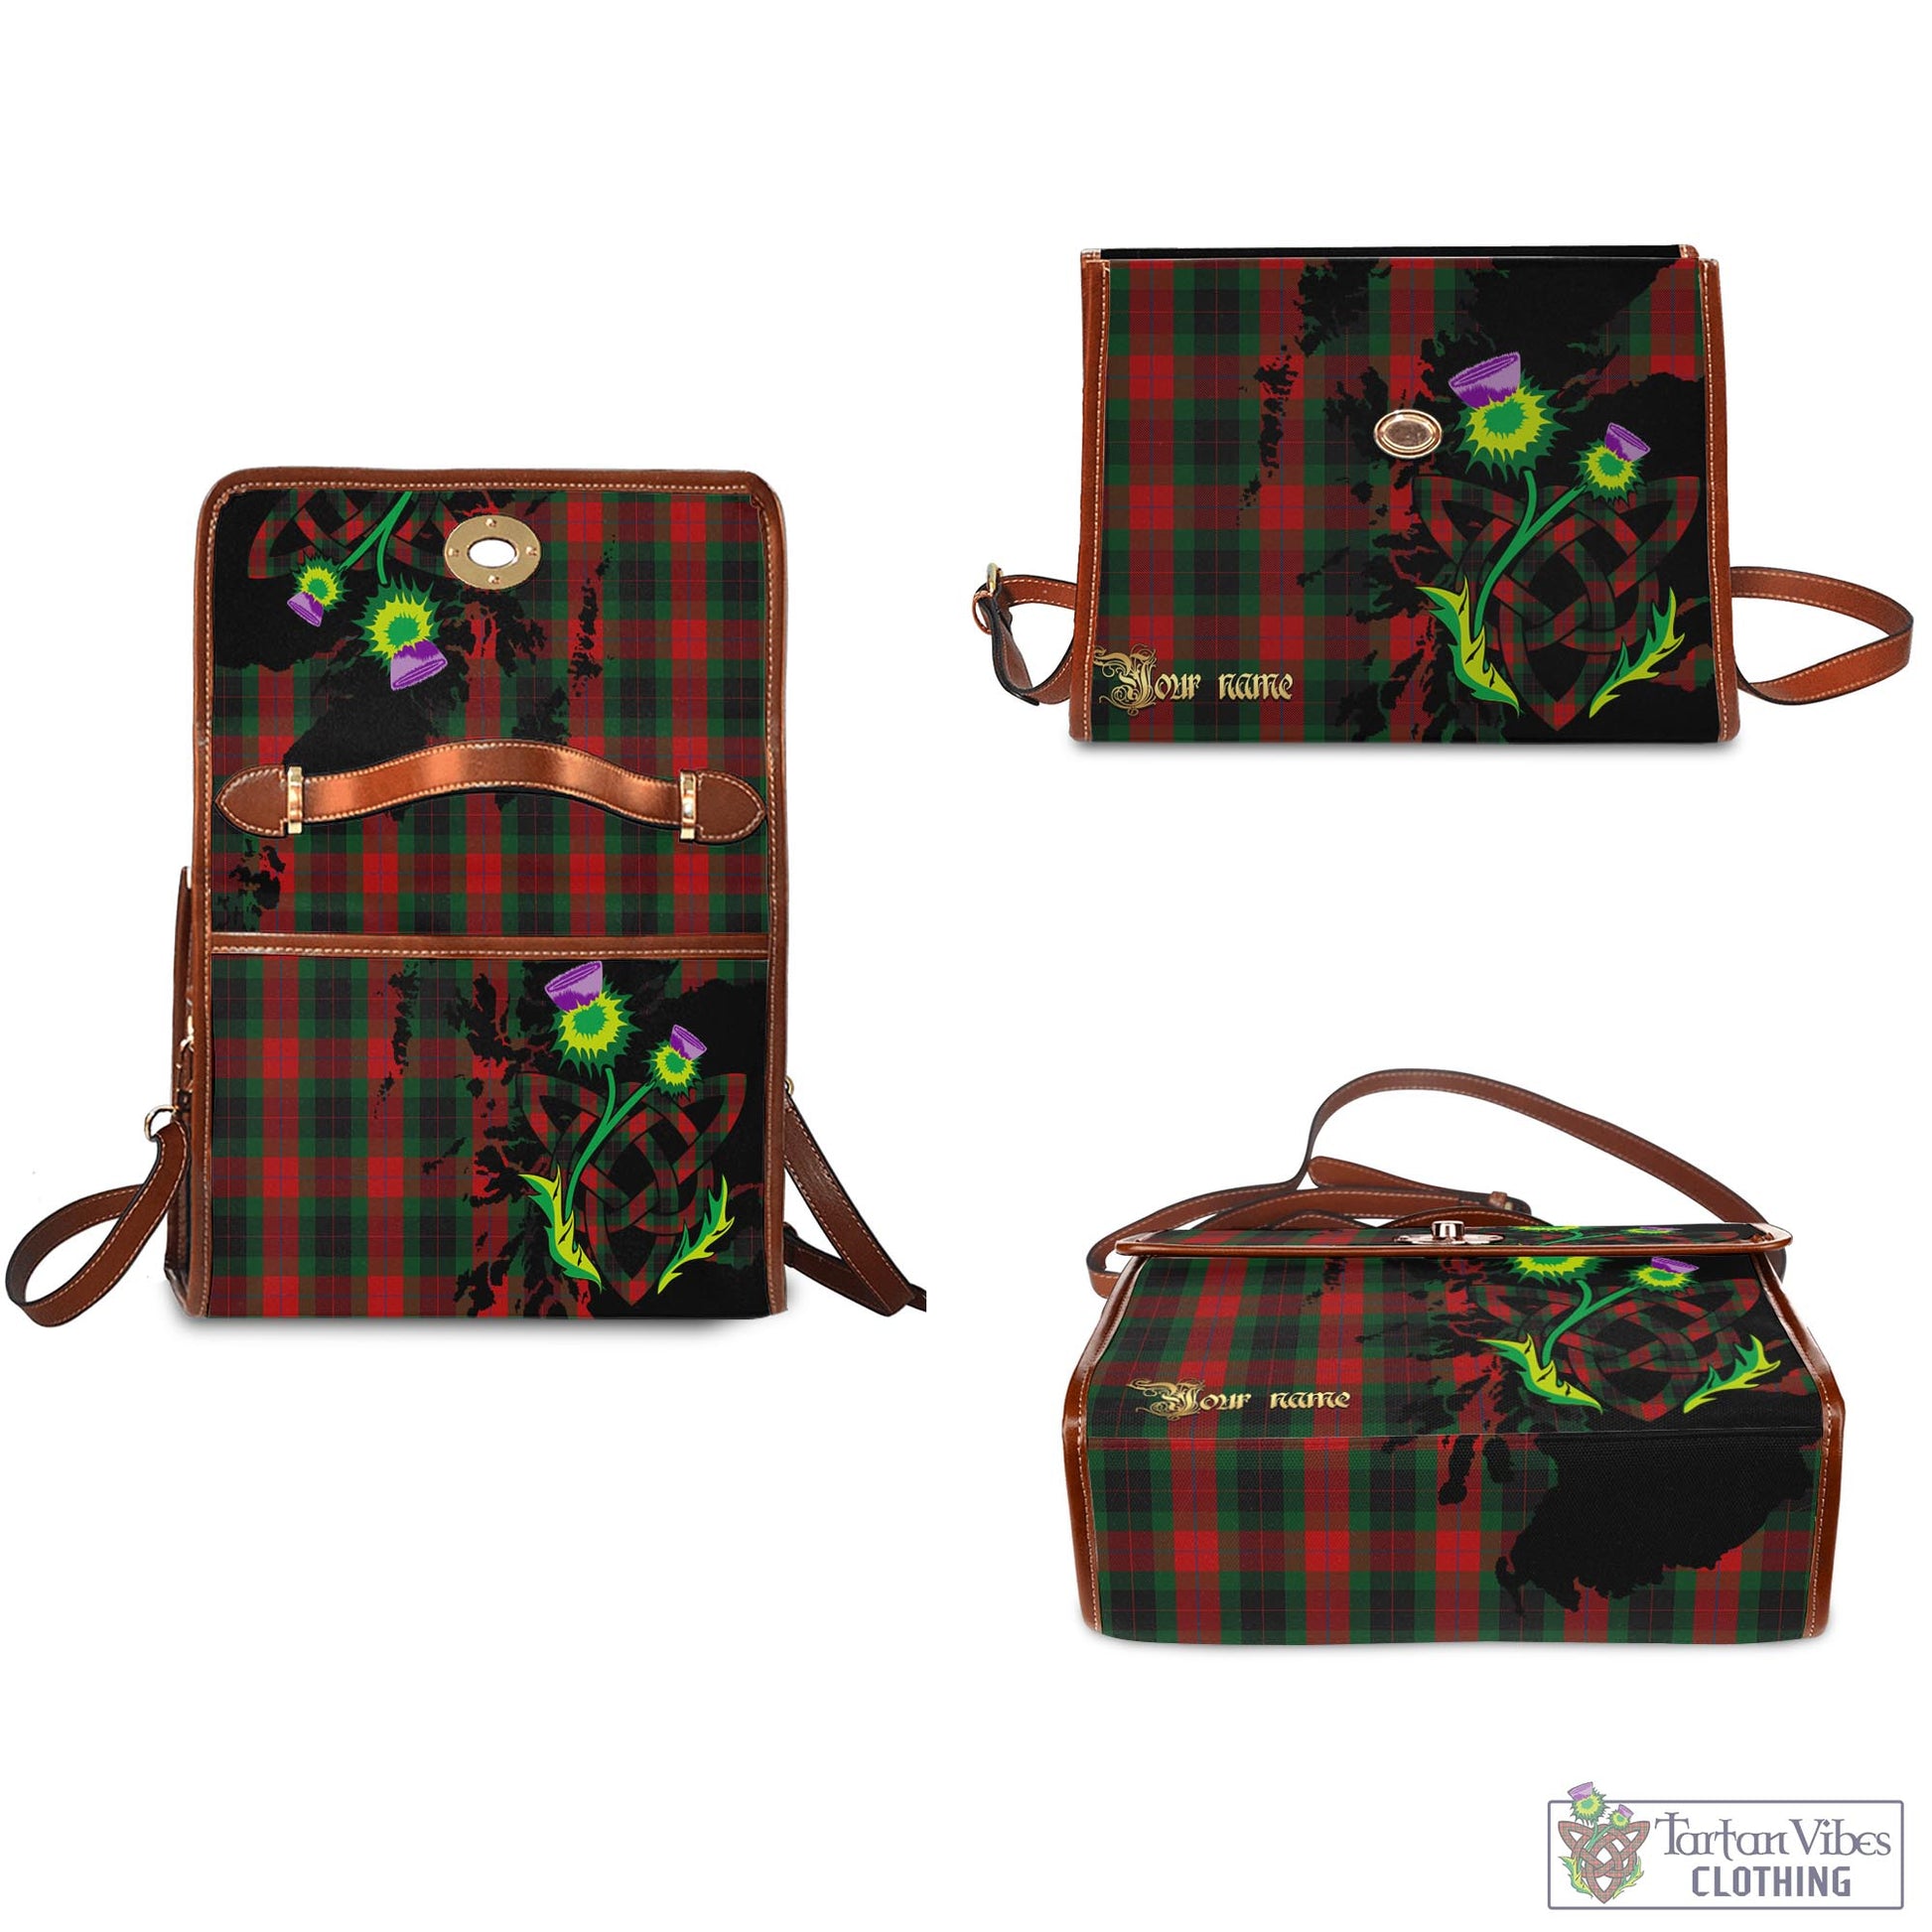 Tartan Vibes Clothing Skene of Cromar Black Tartan Waterproof Canvas Bag with Scotland Map and Thistle Celtic Accents